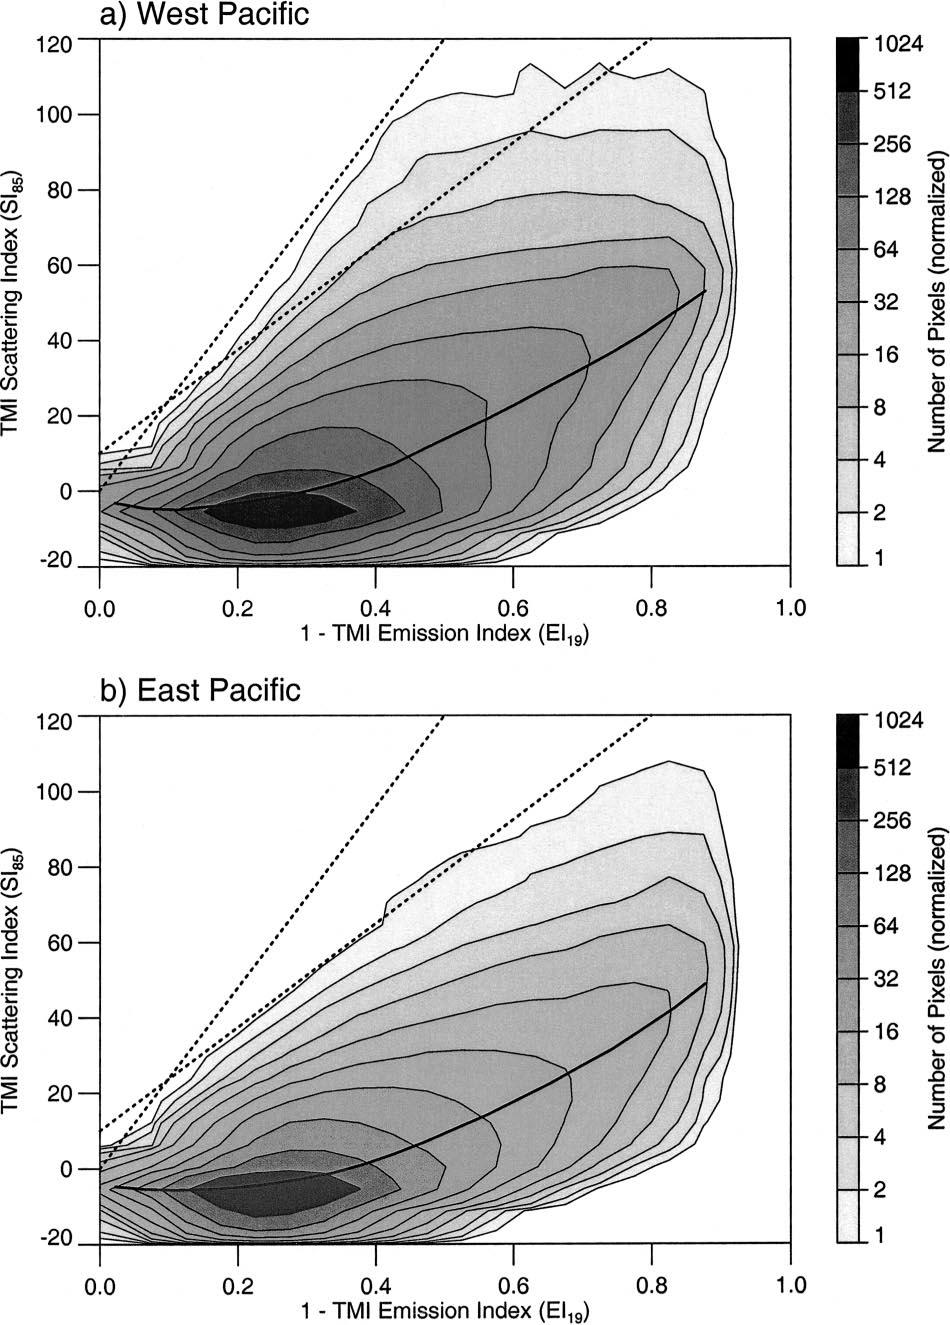 3666 JOURNAL OF CLIMATE VOLUME 15 FIG. 6. Two-dimensional histograms of TMI scattering versus emission indices over the (a) west and (b) east Pacific regions.